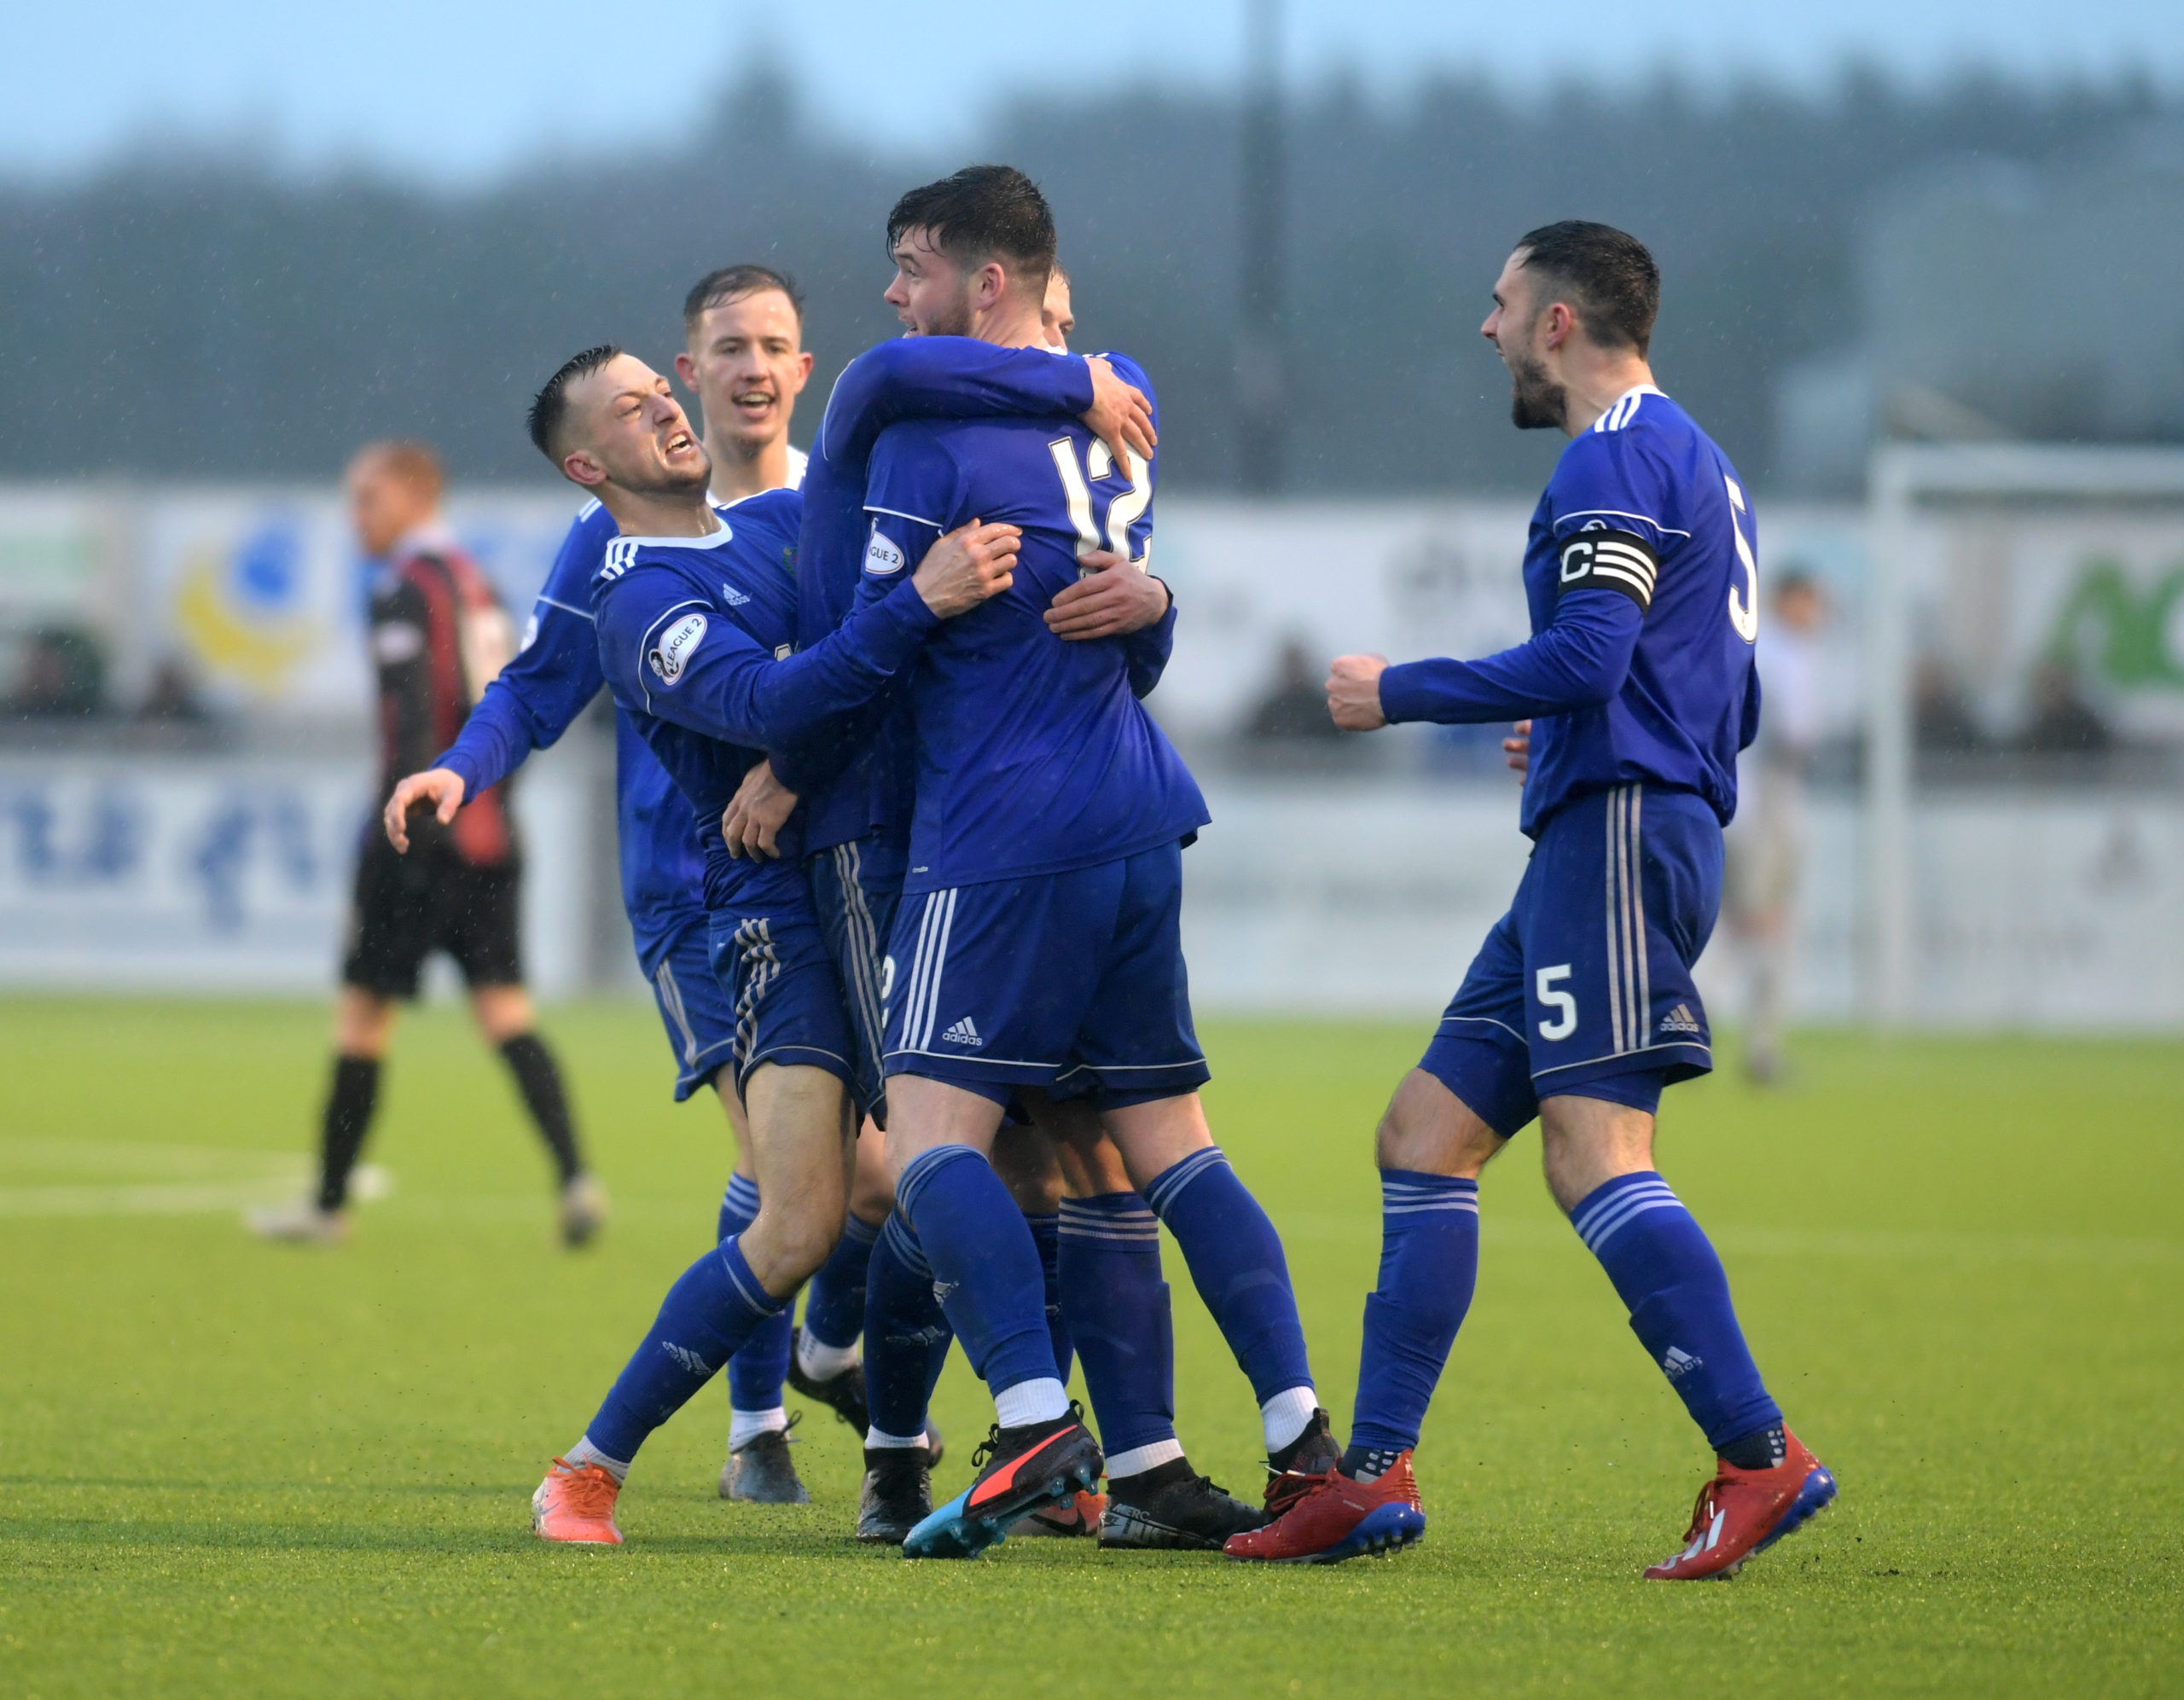 Cove's Daniel Higgins celebrates his goal. Picture by Kath Flannery